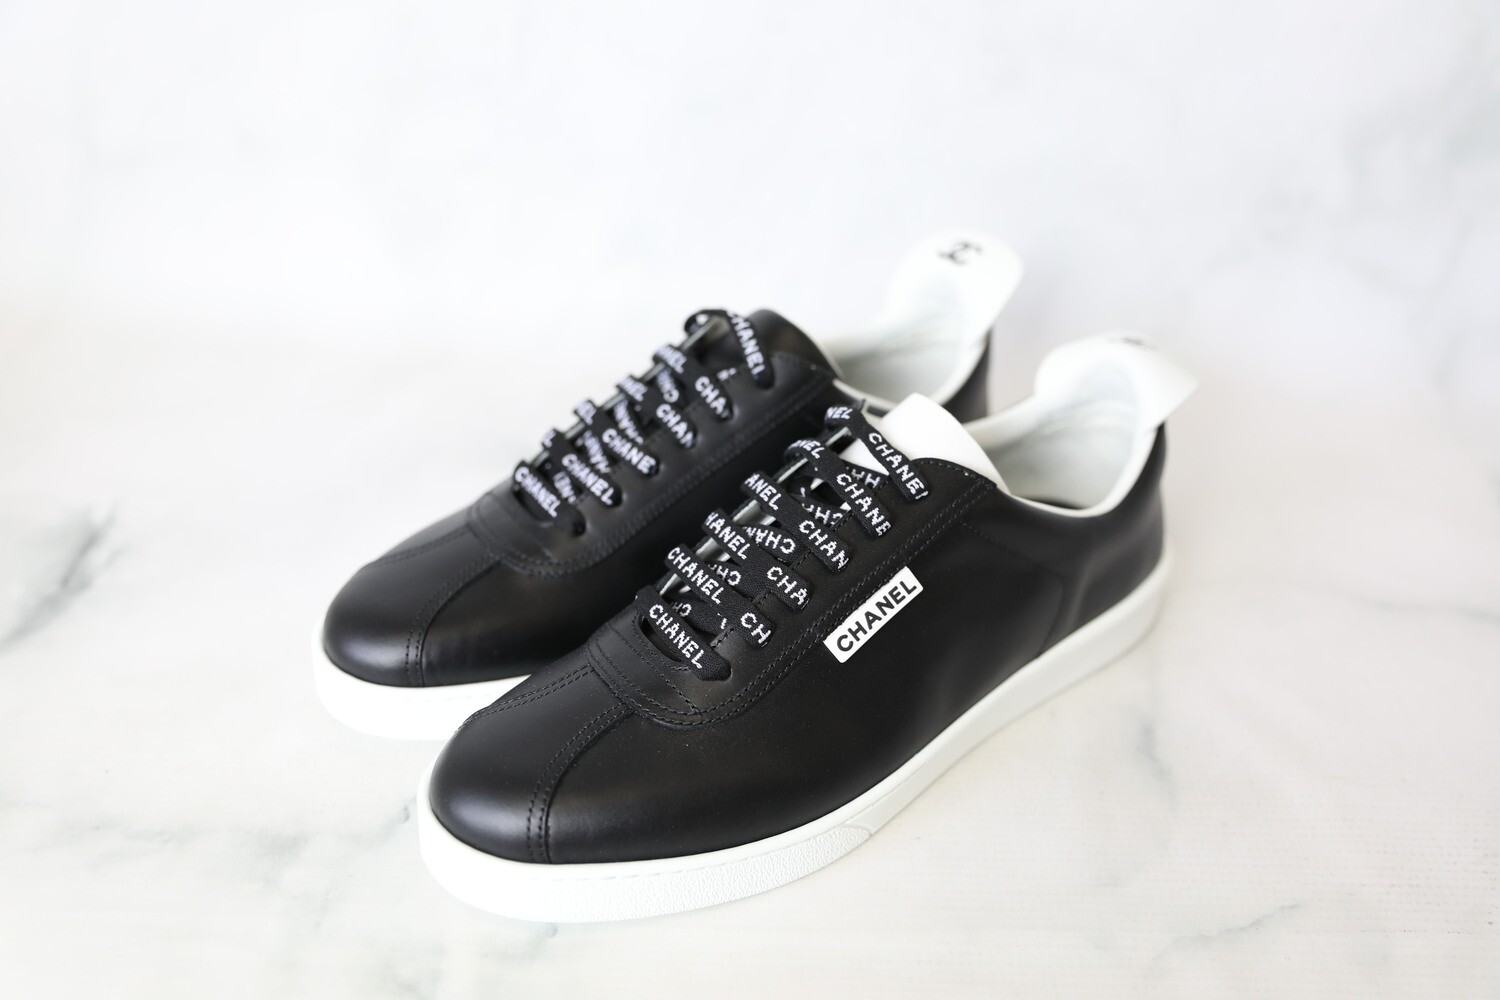 Get the best deals on CHANEL White Athletic Shoes for Women when